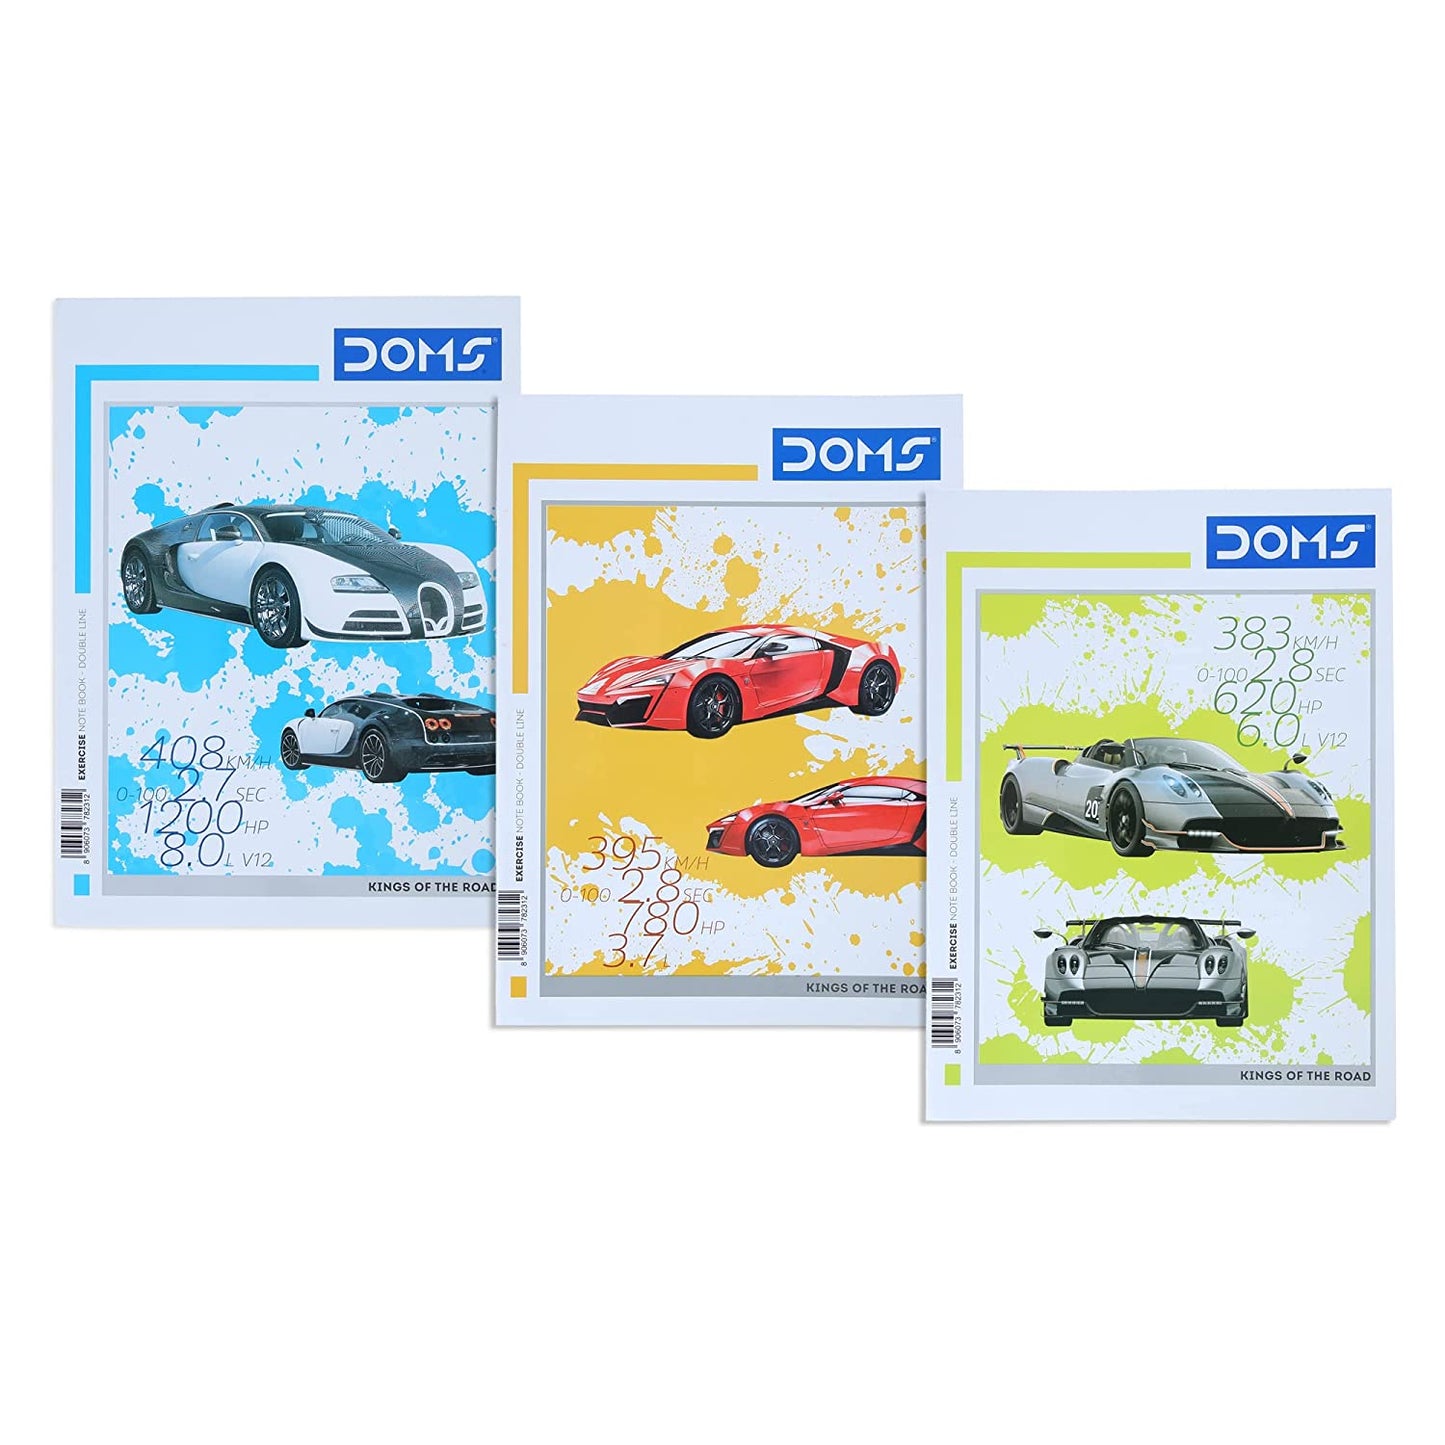 Doms Kings Of The Road Series Notebook | Double Line | 57Gsm | 172 Pages | 18 X 24 Cm | Pack Of 1 | For School- College And Office Use